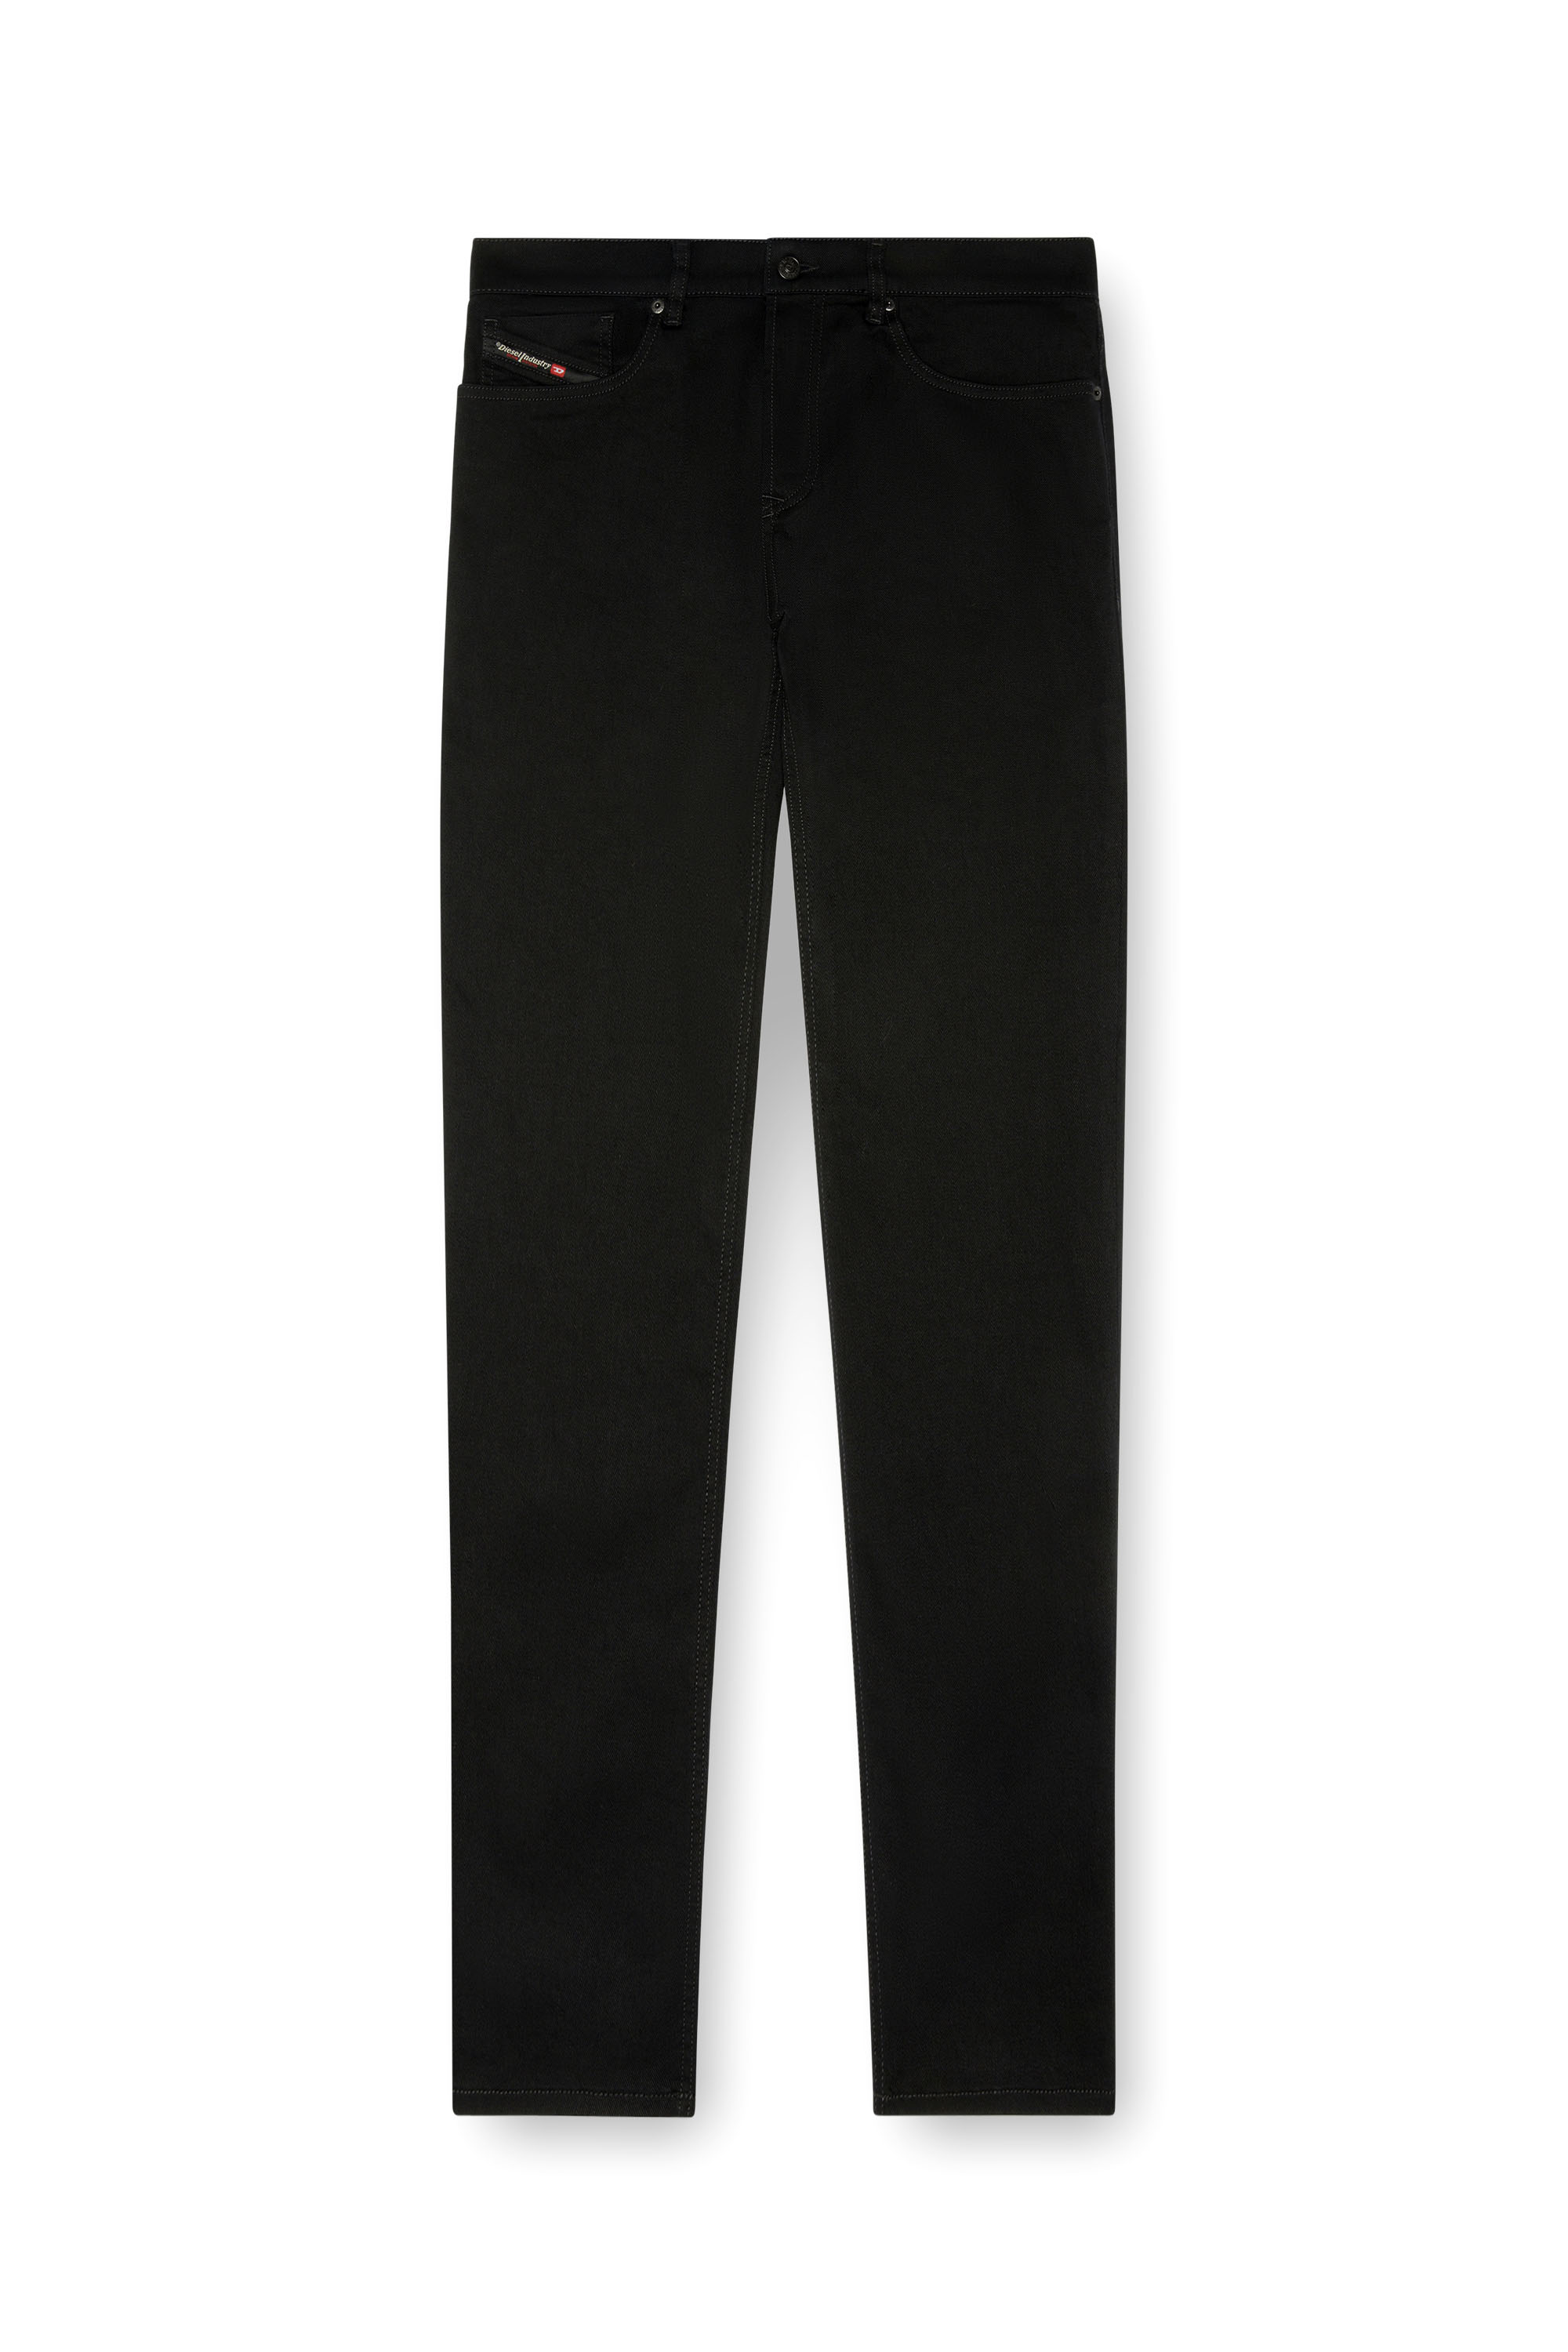 Diesel - Tapered Jeans 2023 D-Finitive 069YP, Hombre Tapered Jeans - 2023 D-Finitive in Negro - Image 5